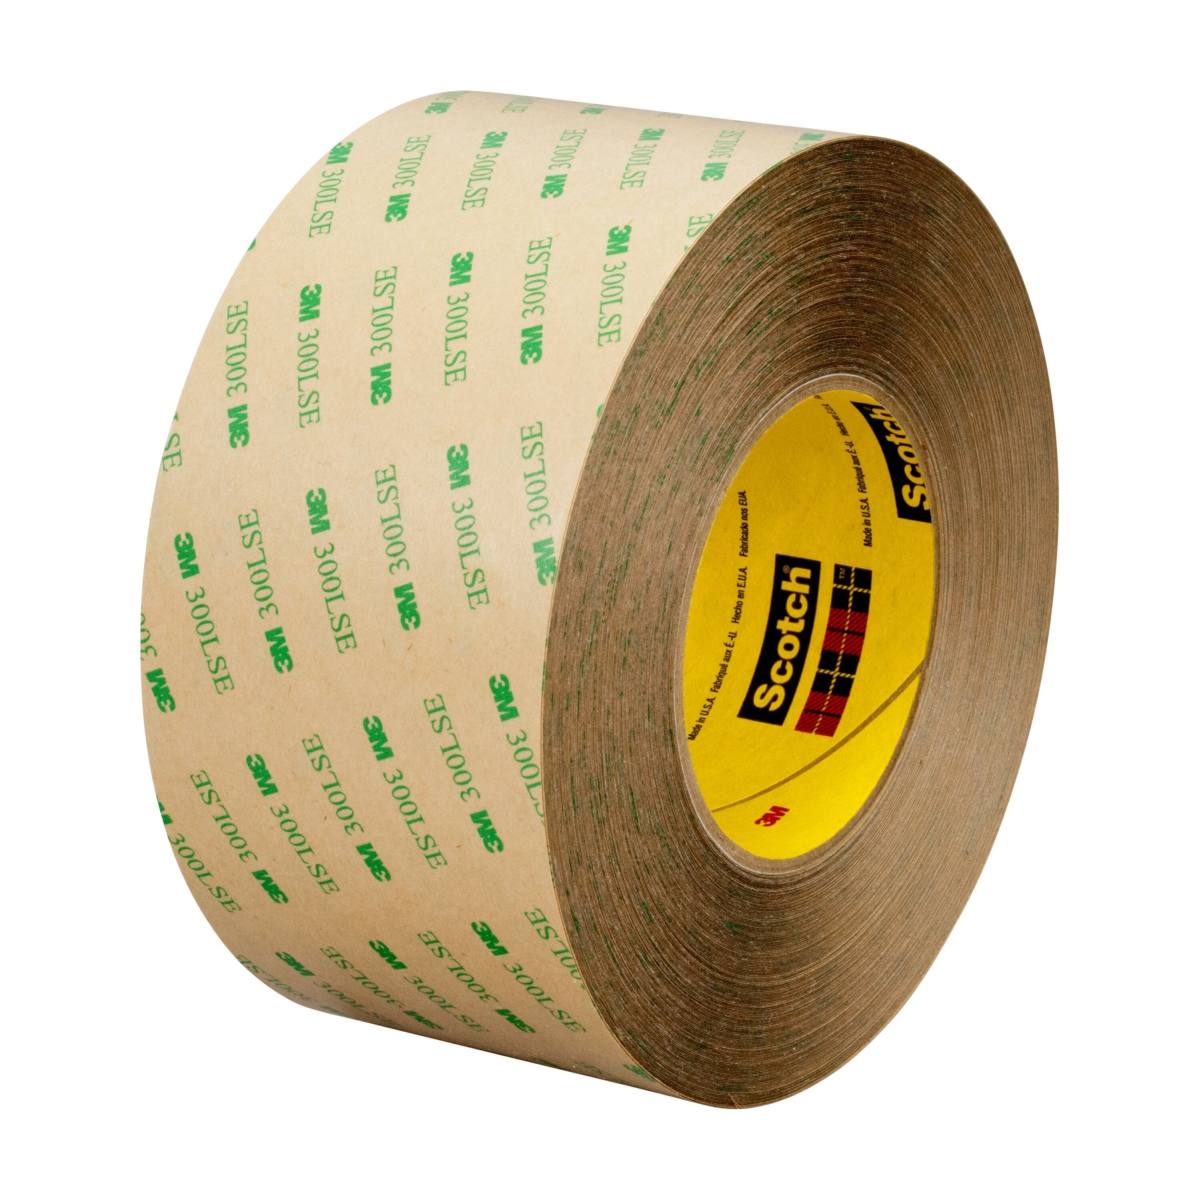 3M Double-sided adhesive tape with polyester backing 93020LE, transparent, 6 mm x 55 m, 0.20 mm